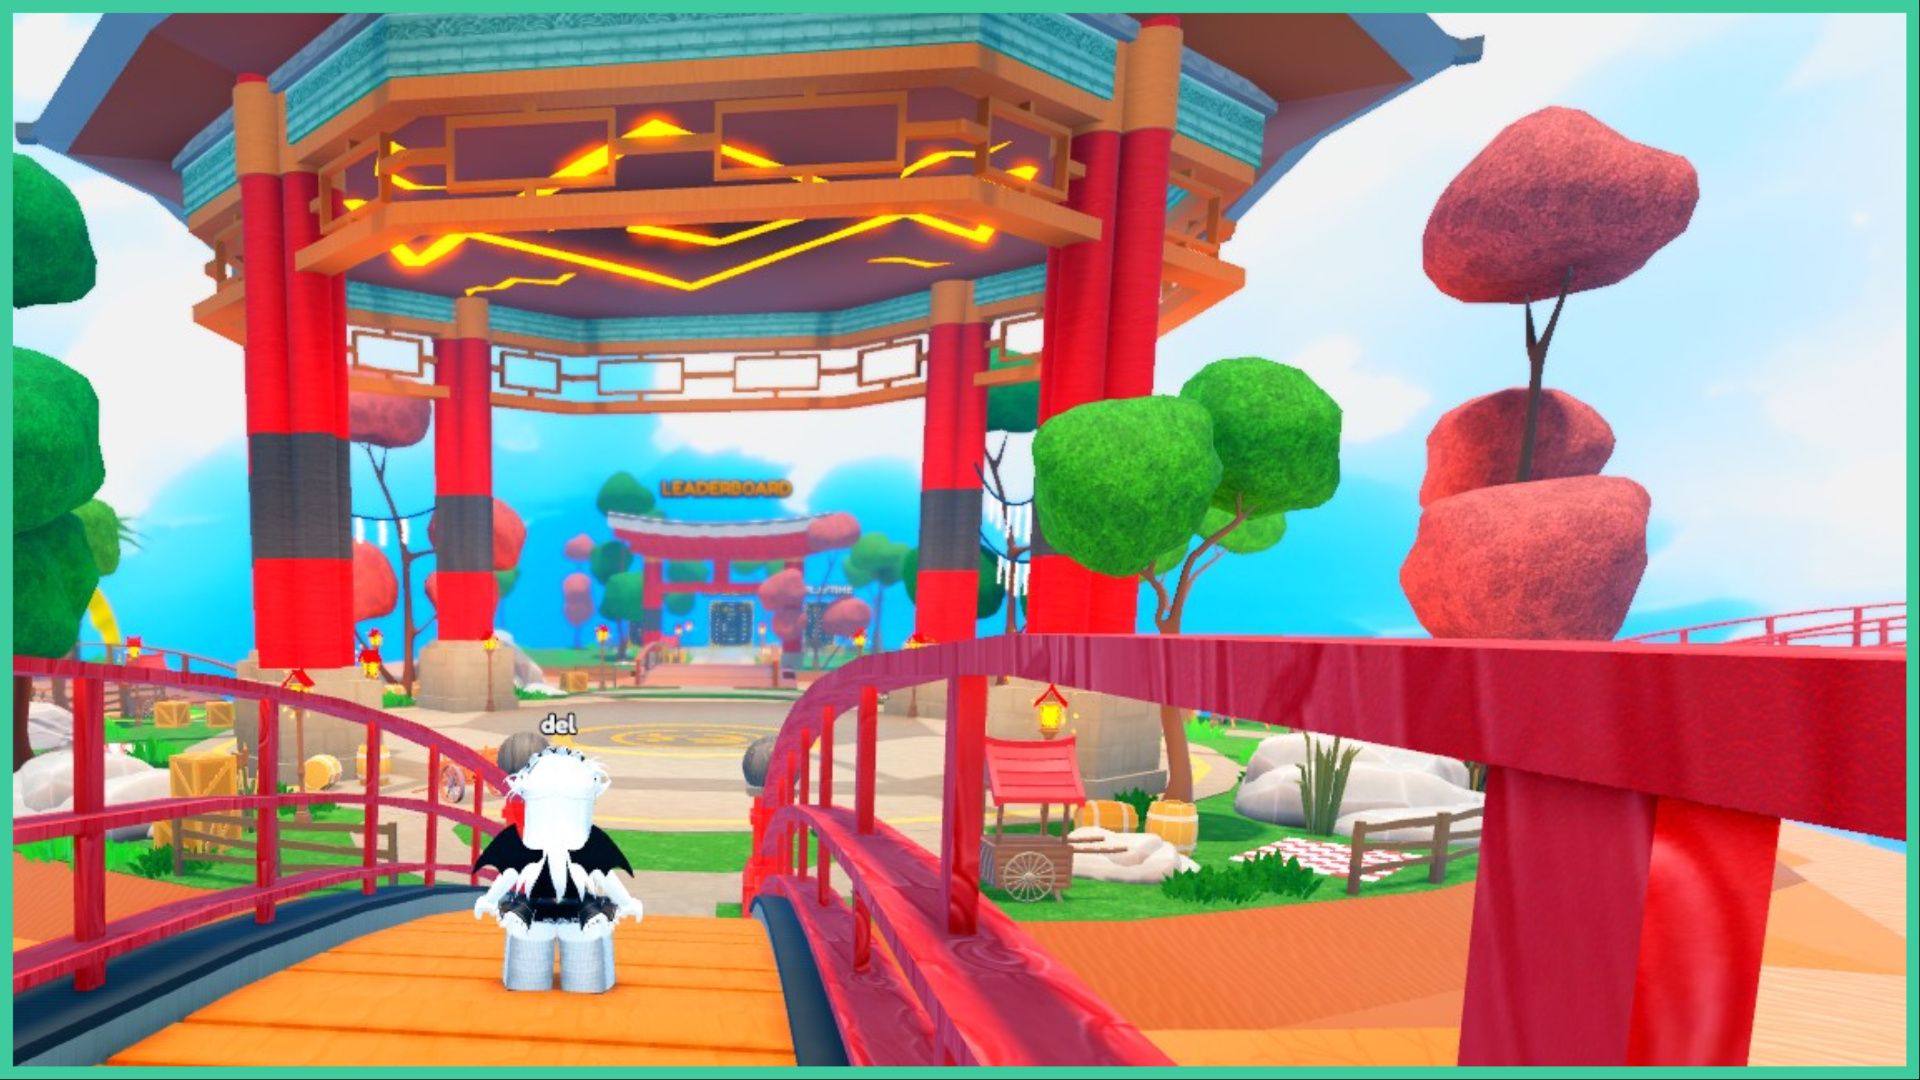 feature image for our anime islands codes guide, the screenshot is of the game's lobby as a robox player stands on a wooden bridge facing a large pagoda with green and orange trees sprinkled around it, as well as rocks, grass, wooden barrels and boxes, there is a tori gate in the distance as clouds float by in the blue sky